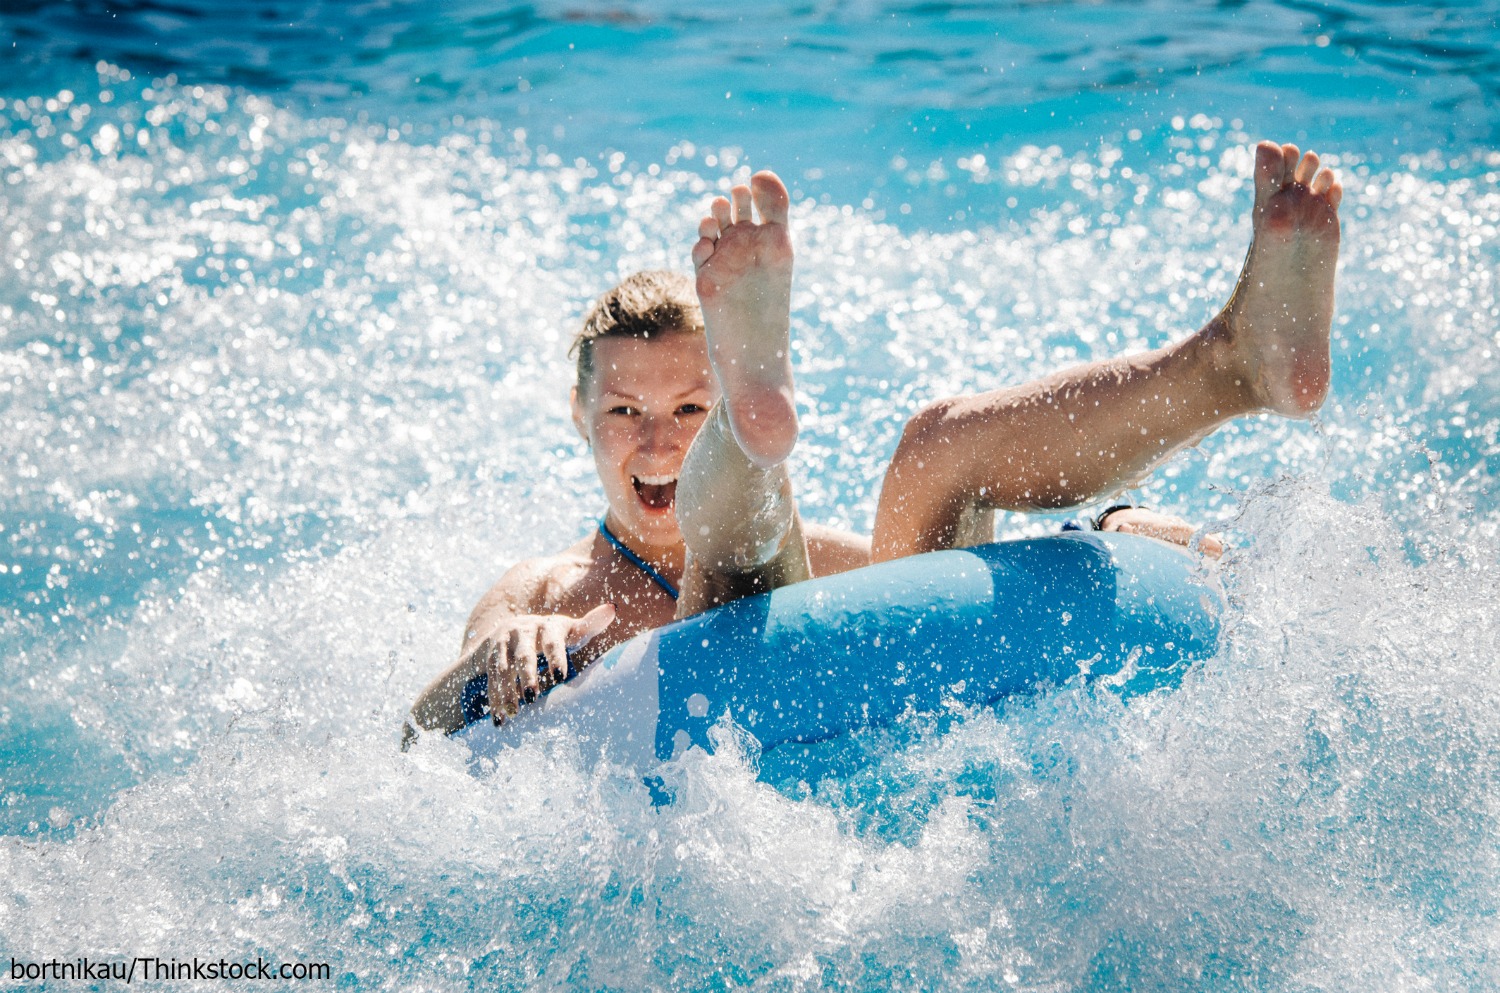 Have an Amazing Day at the Thrilling White Water Branson